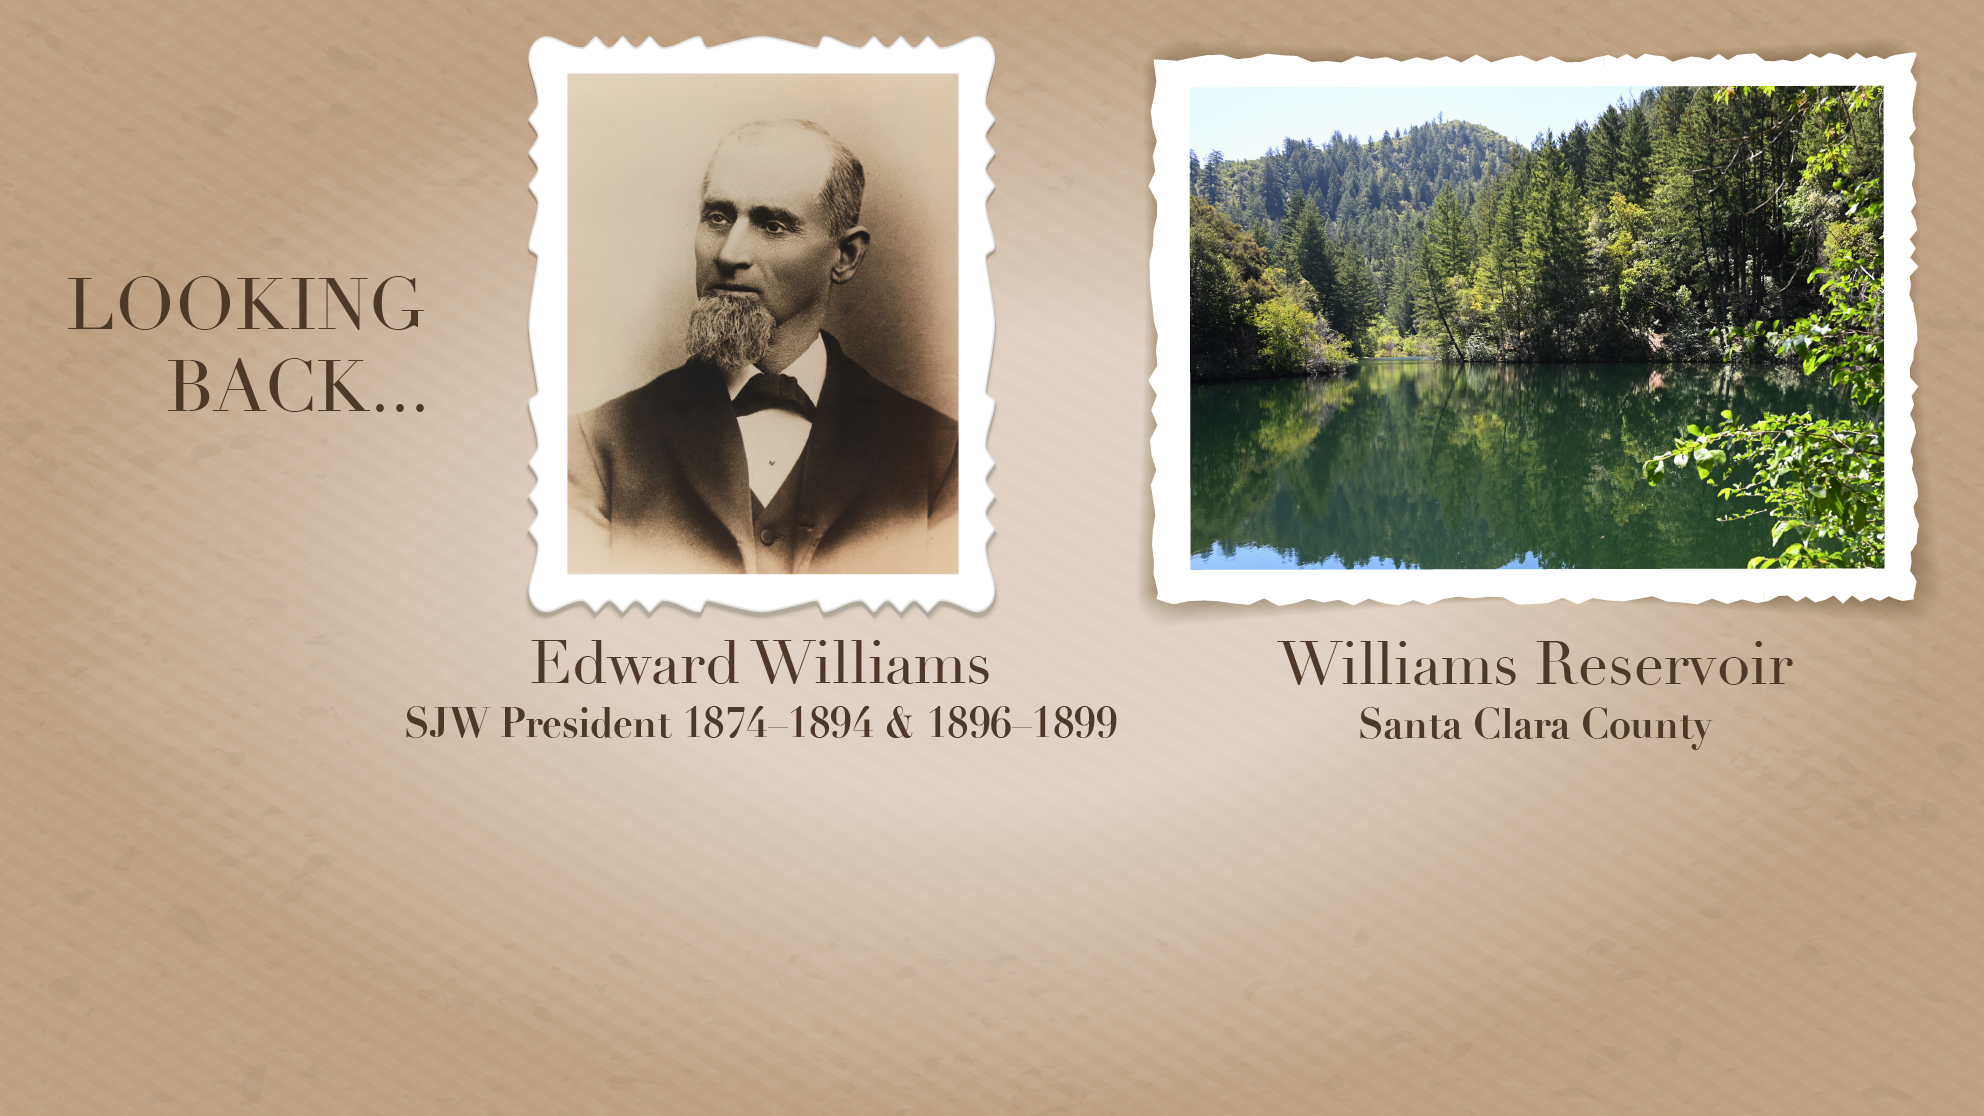 Looking Back - picture of former SJW President Edward Williams and a photo a Lake Williams 